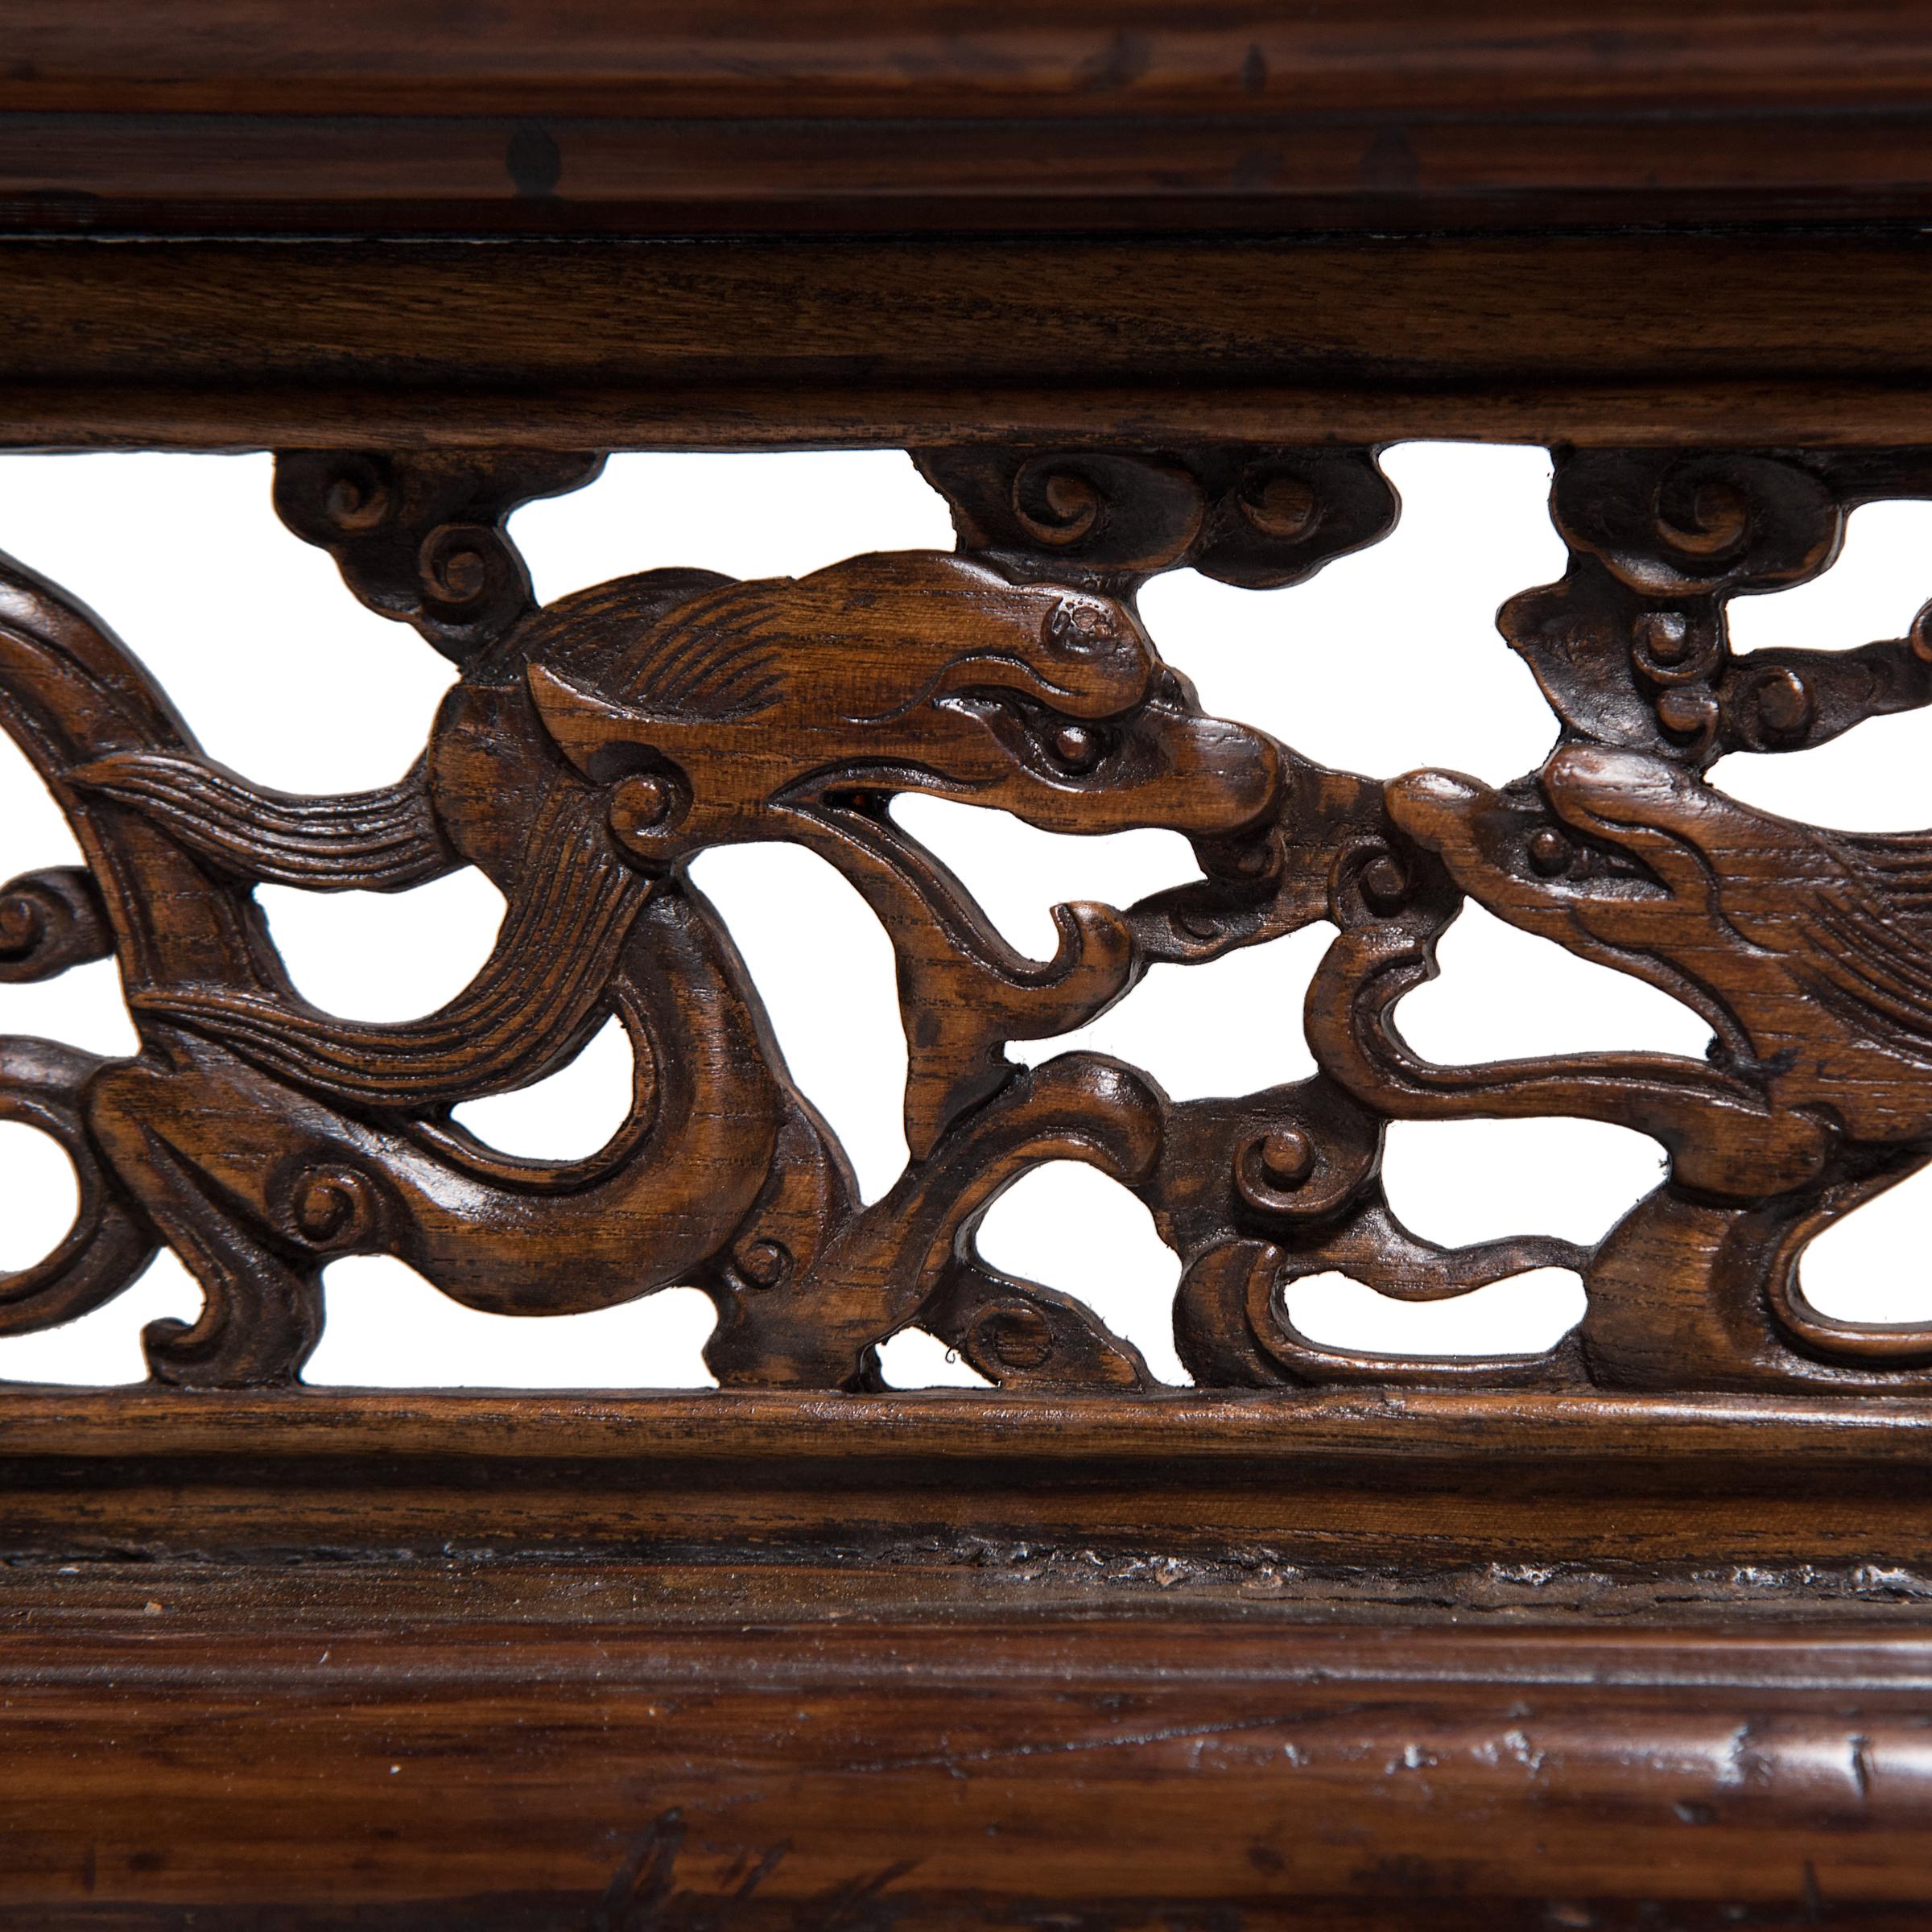 Carved Chinese Three Panel Lattice Screen with Dragon Carvings, c. 1850